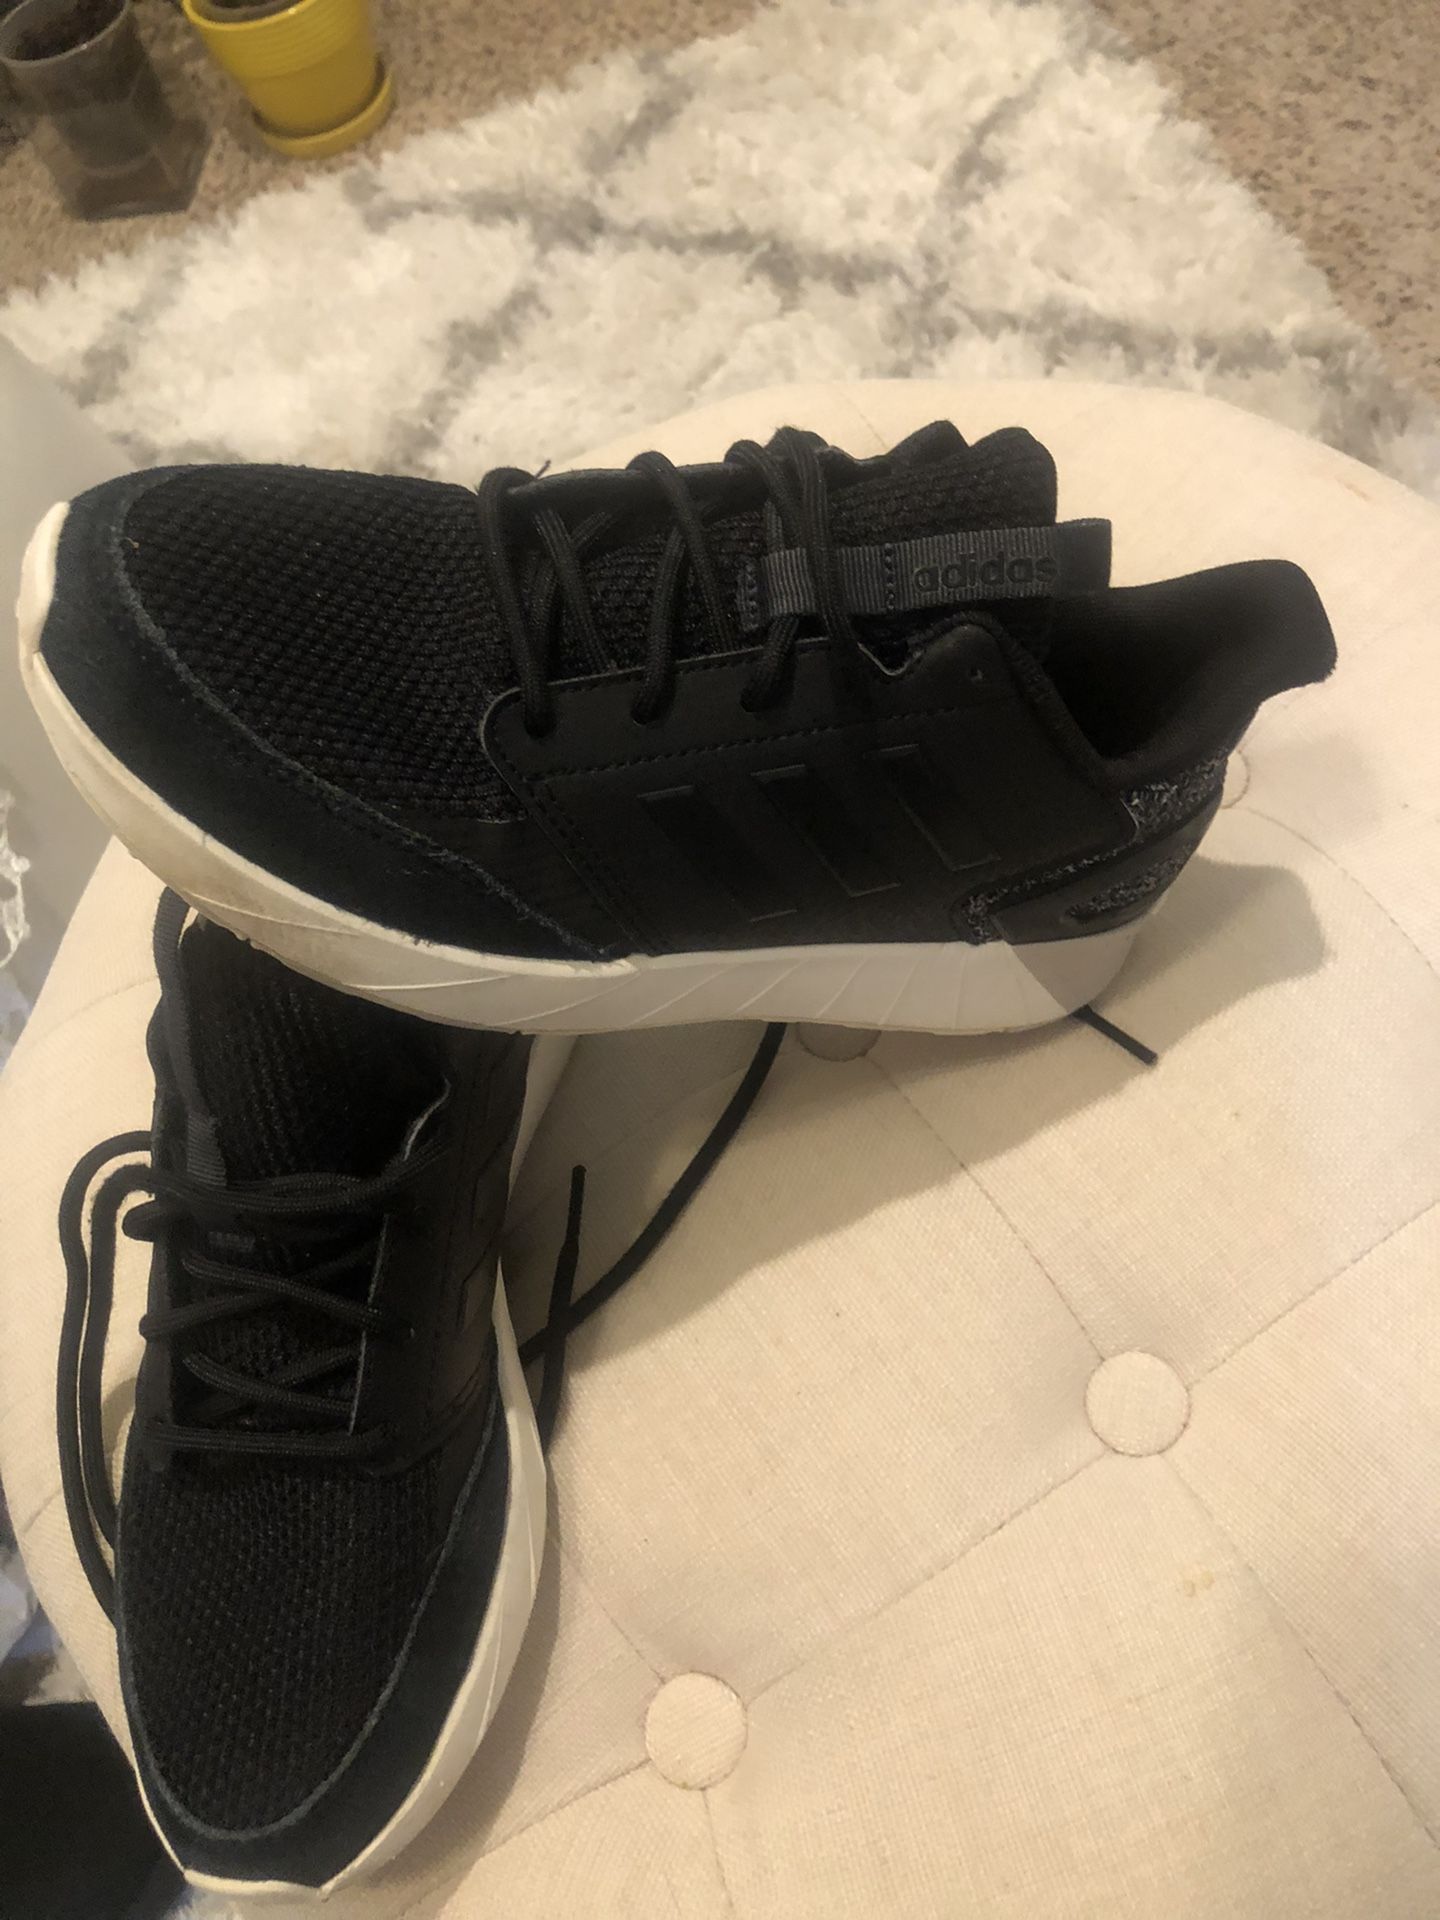 Adidas Women’s Shoes Size 6.5 